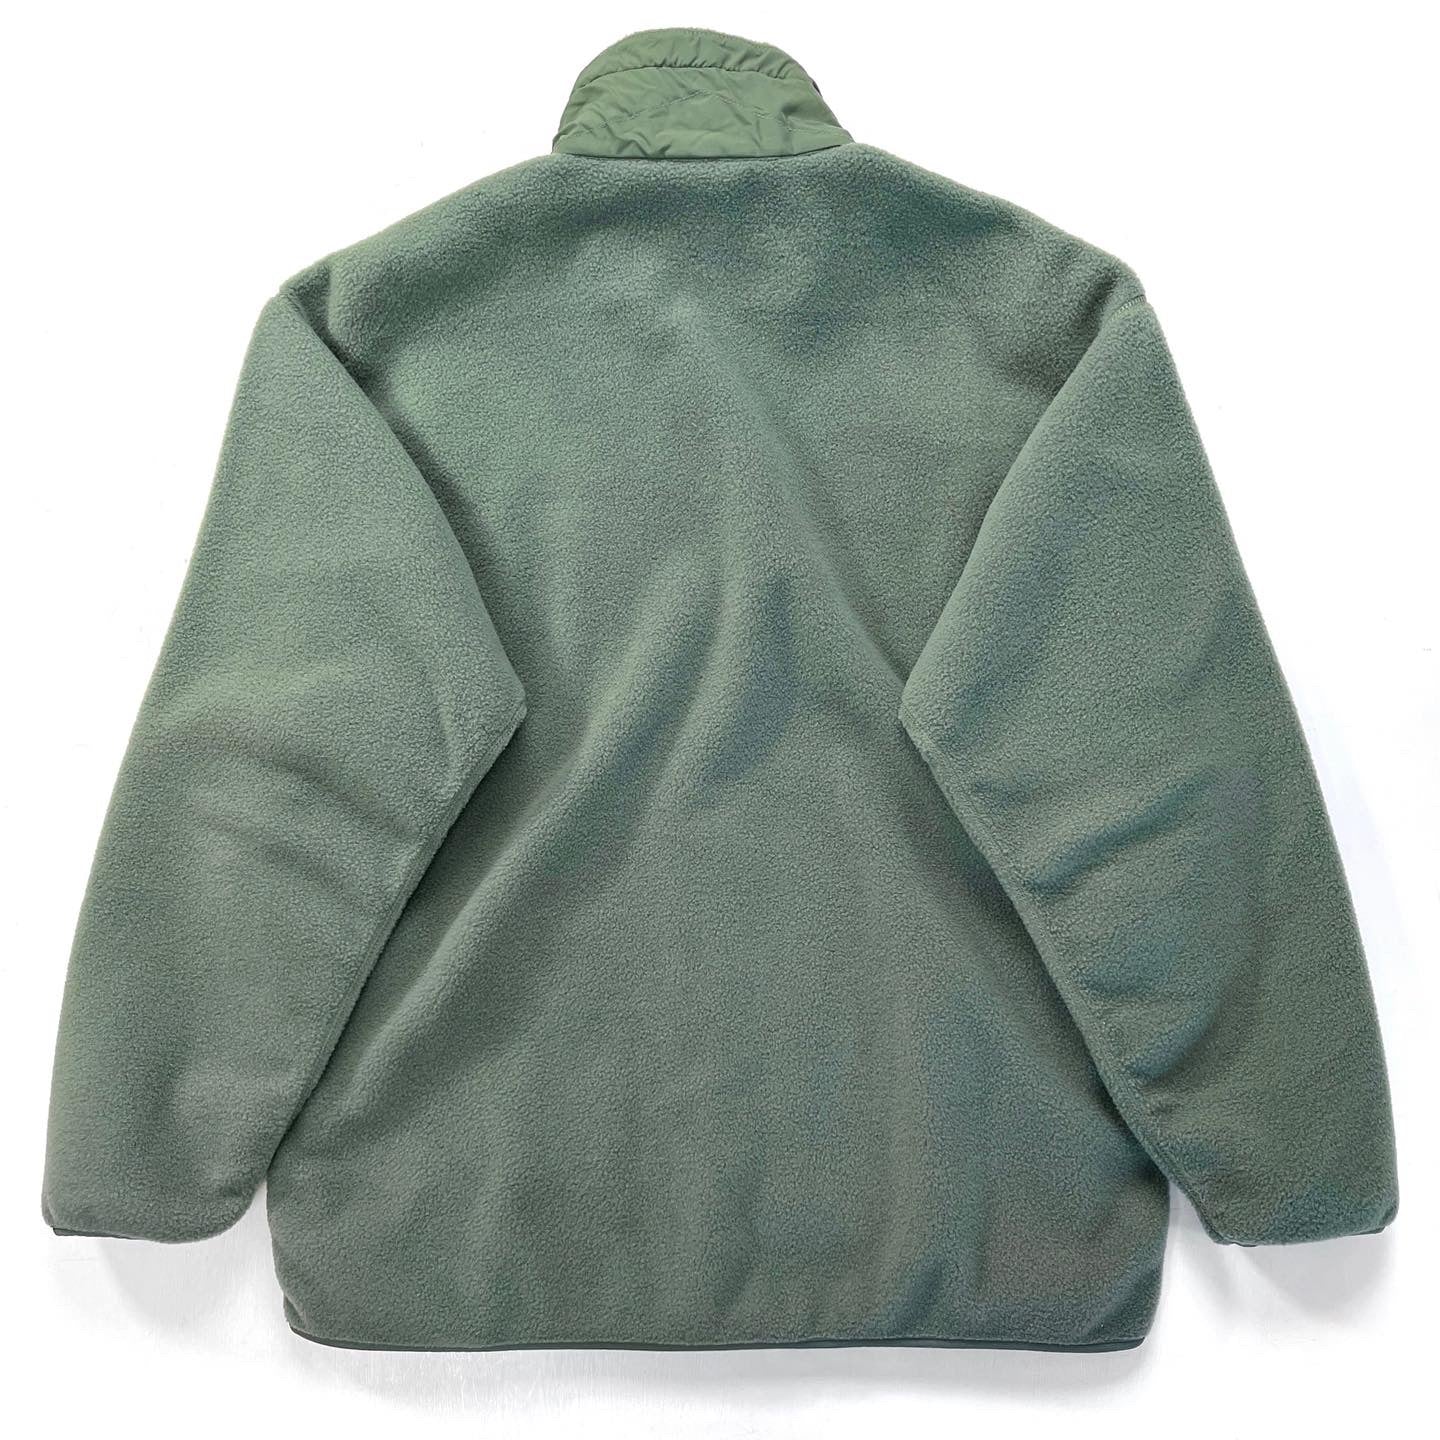 1995 Patagonia Made In The U.S.A. Synchilla Jacket, Eucalyptus (XL)